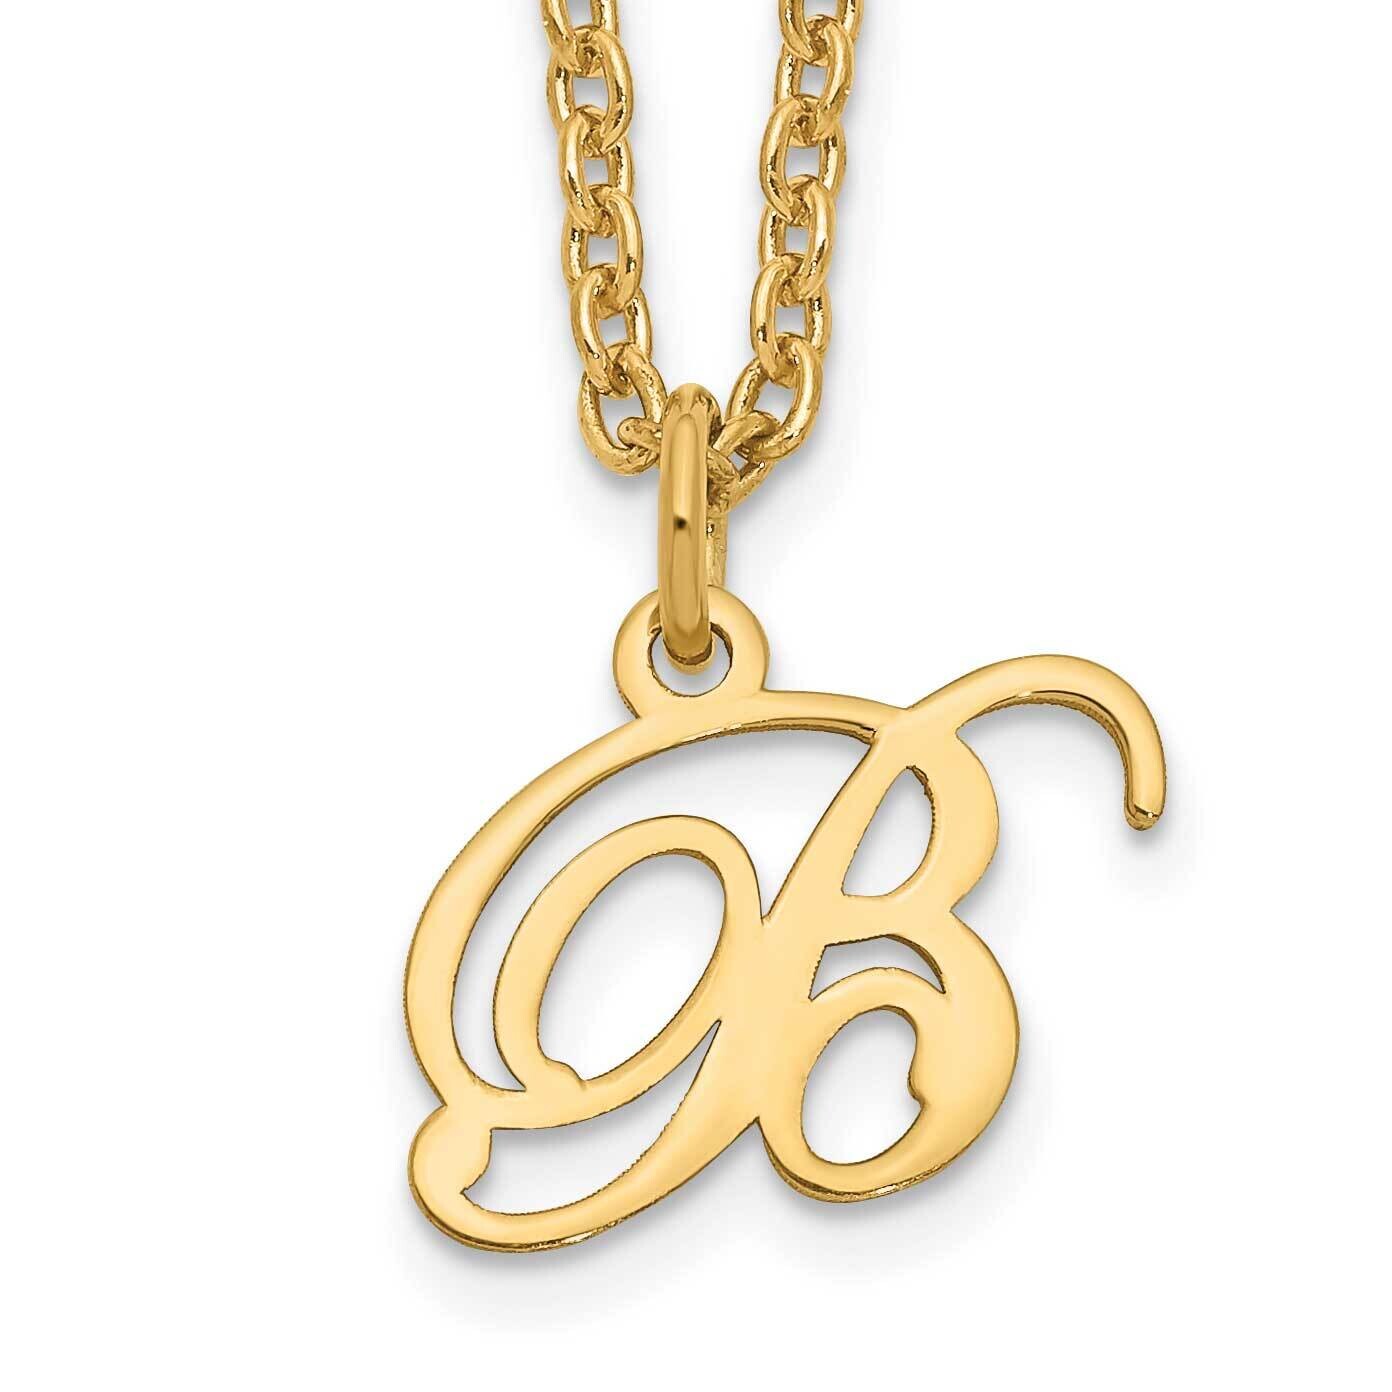 Gold-Plated Letter B Initial Necklace Sterling Silver XNA756GP/B